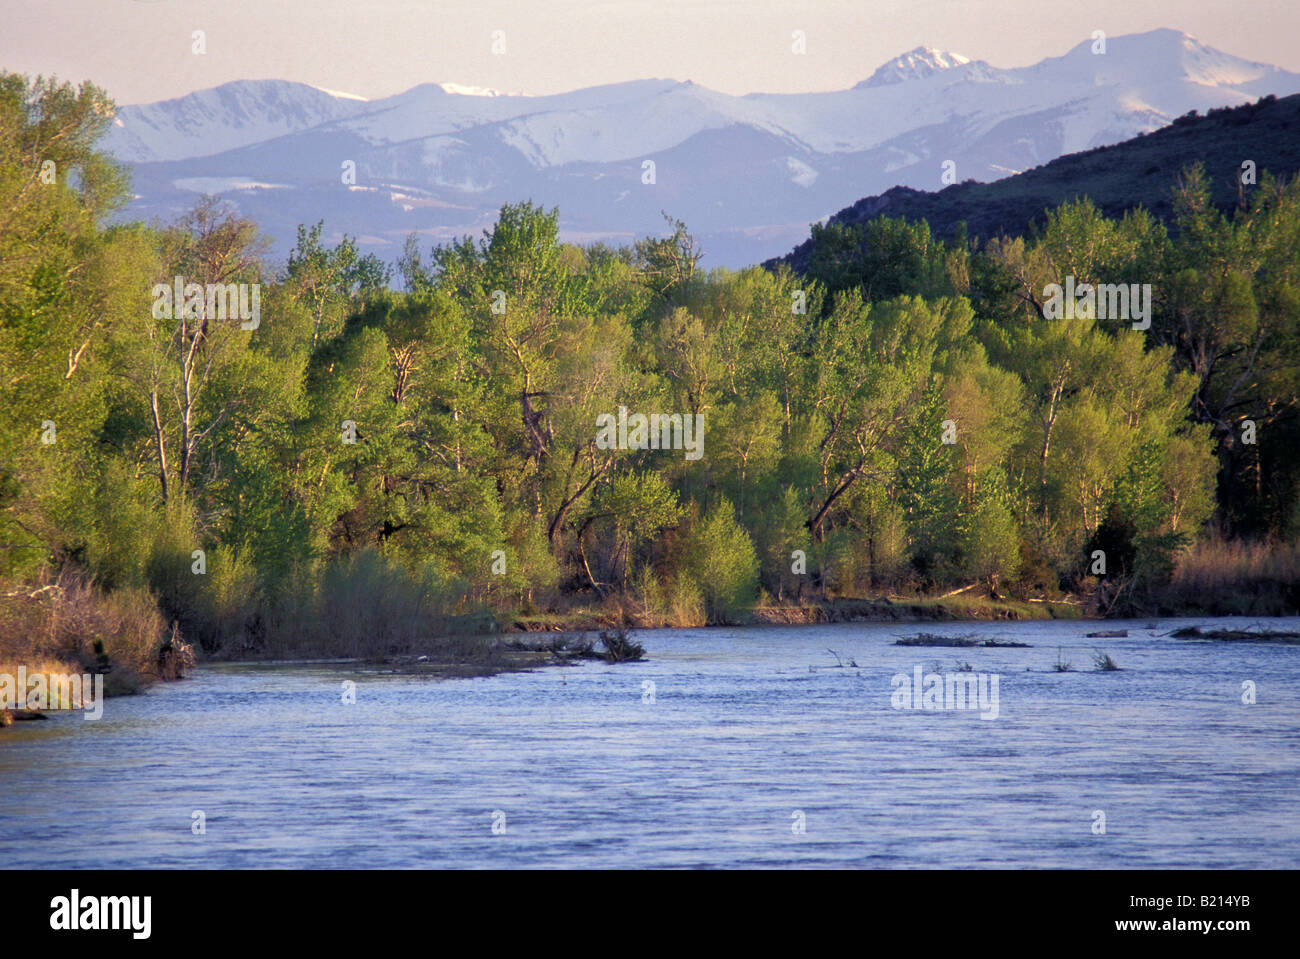 Jefferson River named for President Thomas Jefferson by Lewis and Clark. Photograph Stock Photo